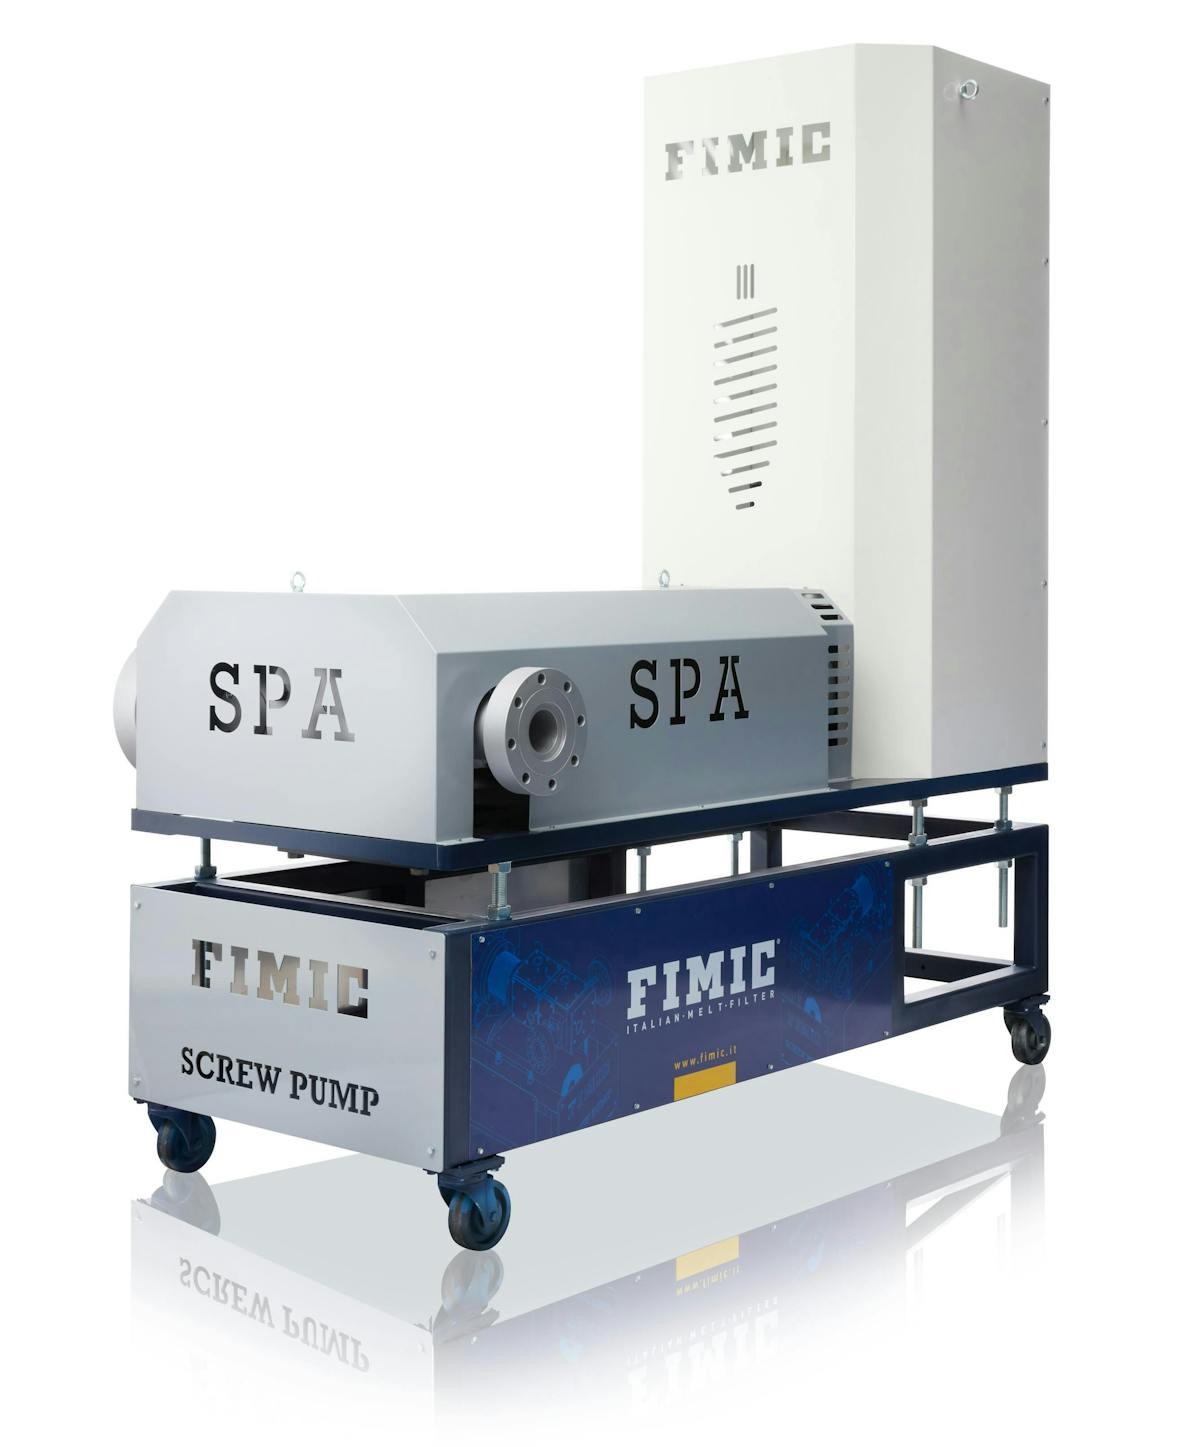 Fimic says its new SPA 190 screw pump is the largest on the market.